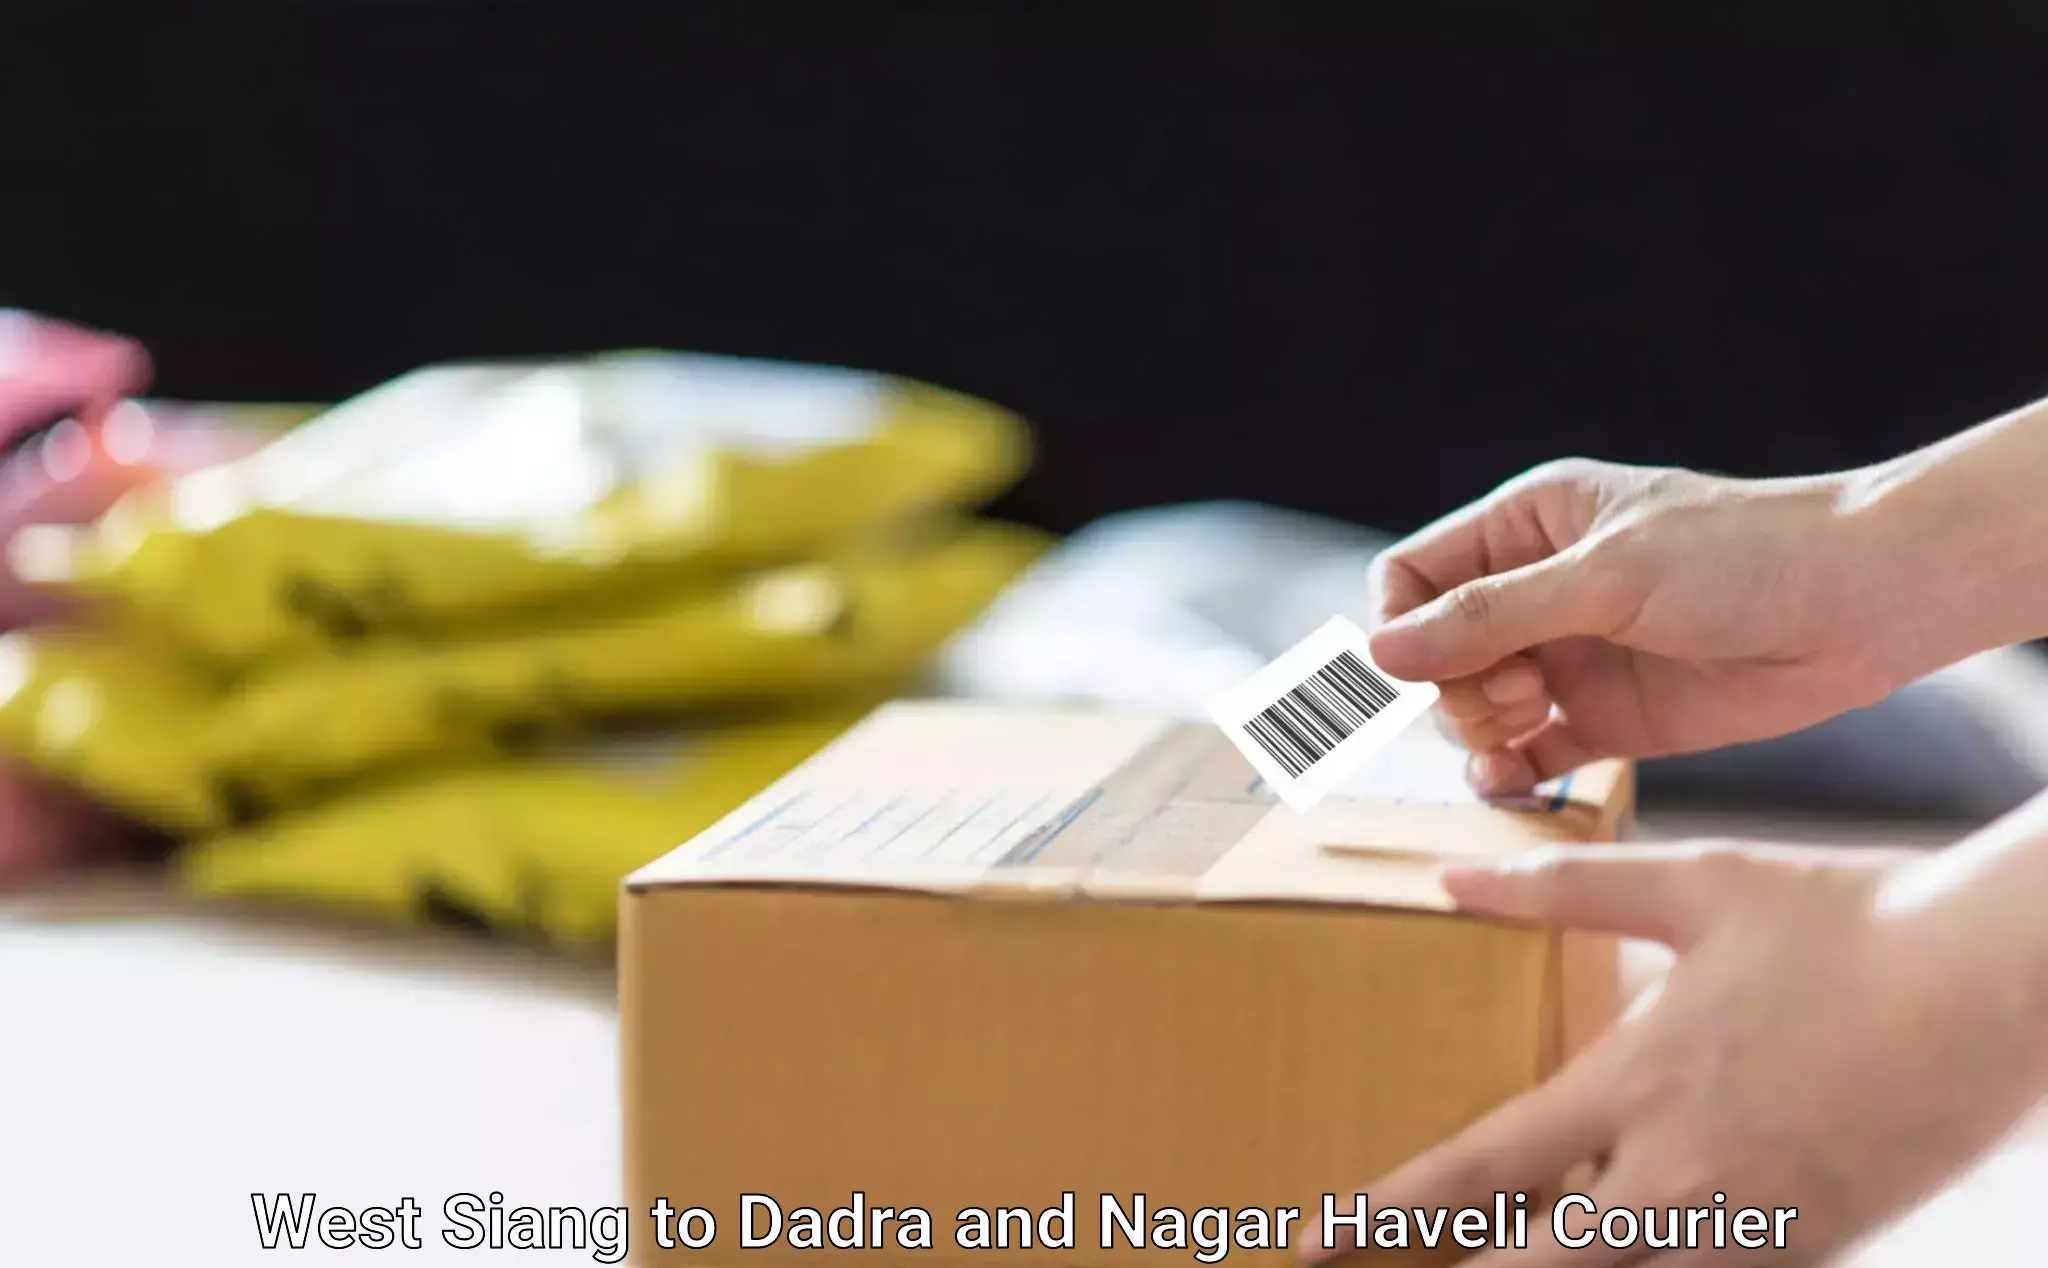 Cargo courier service in West Siang to Dadra and Nagar Haveli